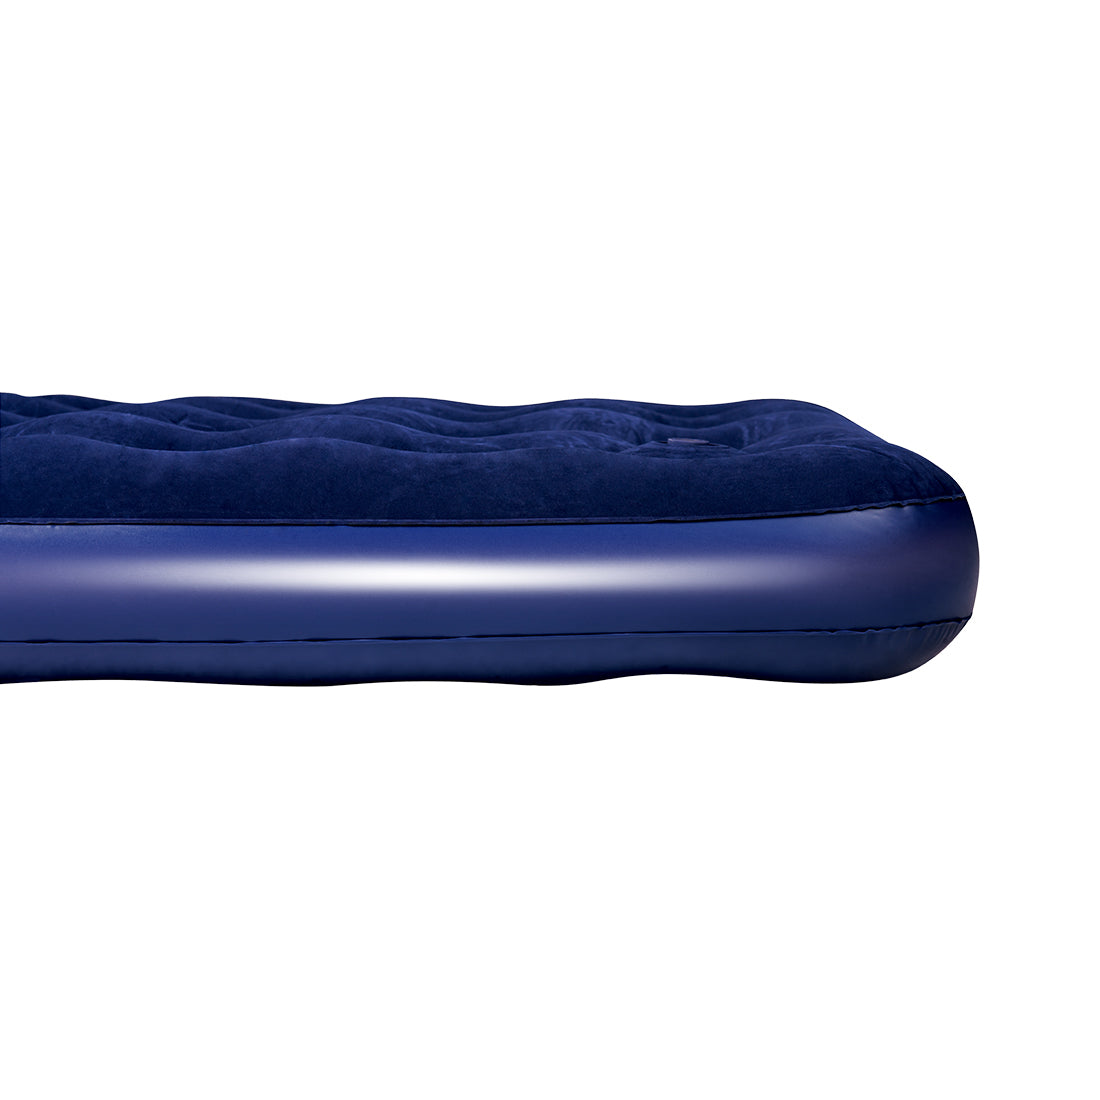 Bestway Pavillo FULL Airbed Inflatable Mattress 28cm with Built-in Foot Pump